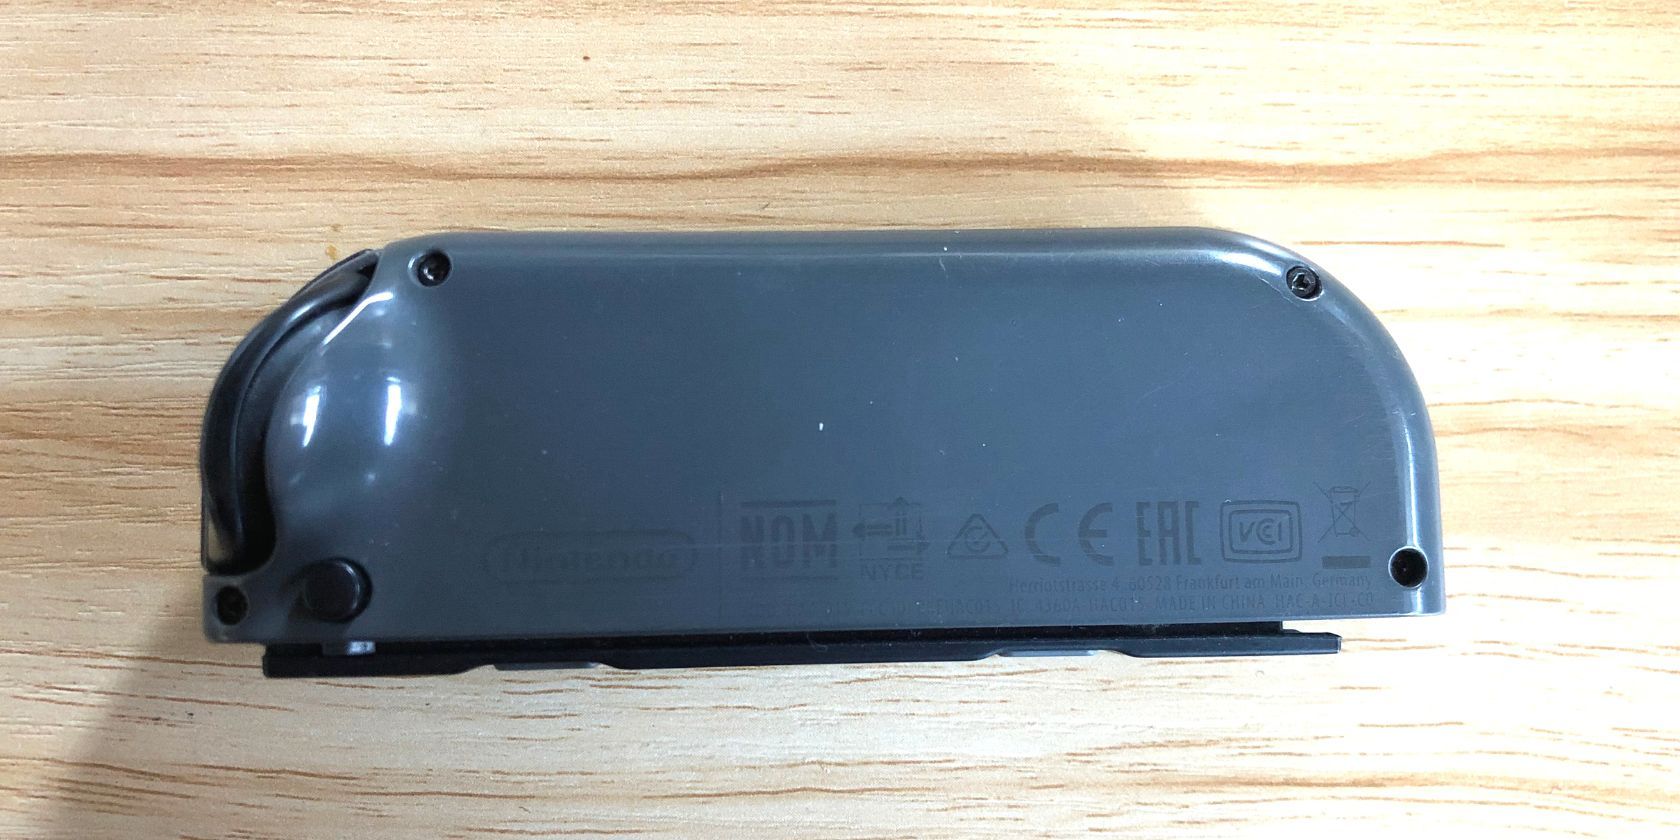 How to replace joy con battery remove the screws from the back